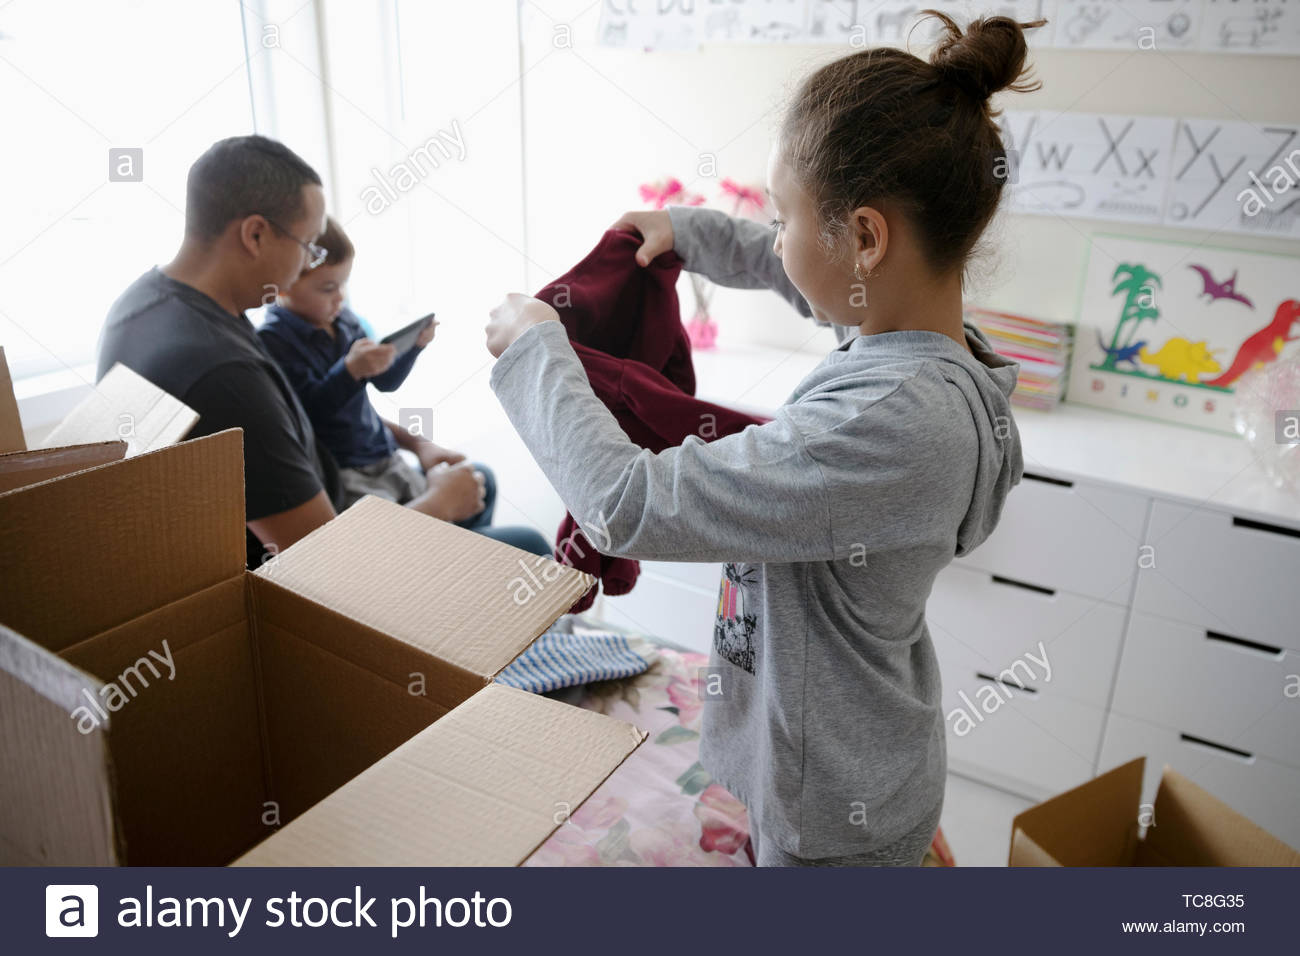 Girl sorting and donating clothes in bedroom Stock Photo